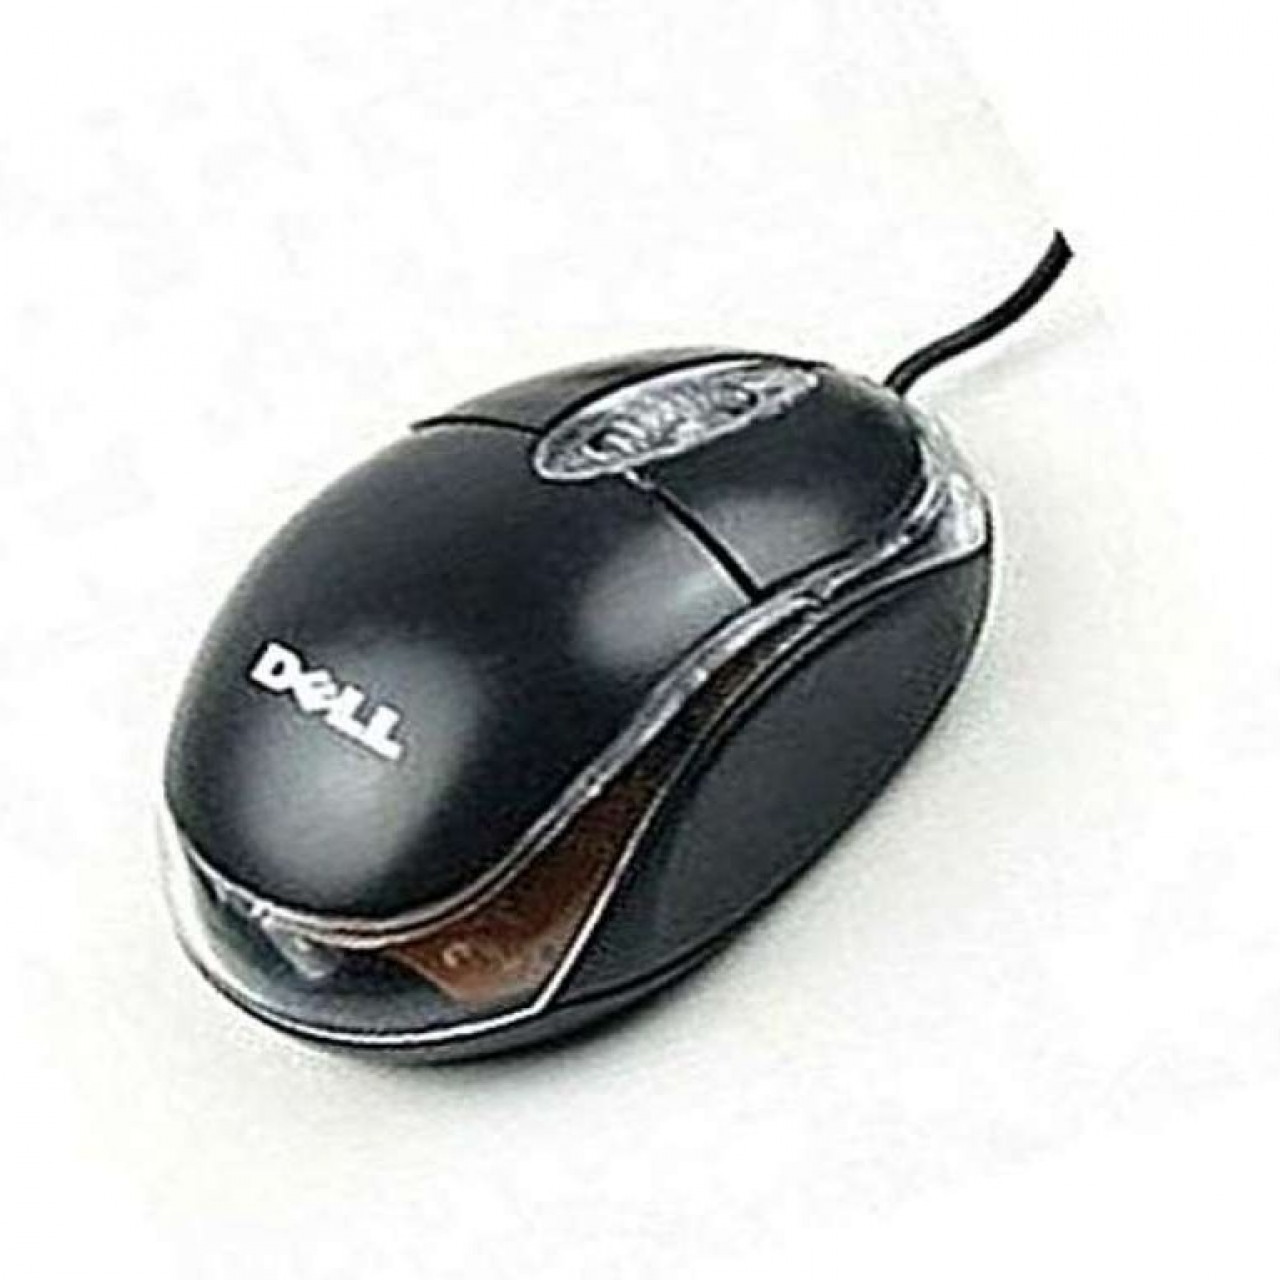 Optical Mouse With Built-in LED - Black